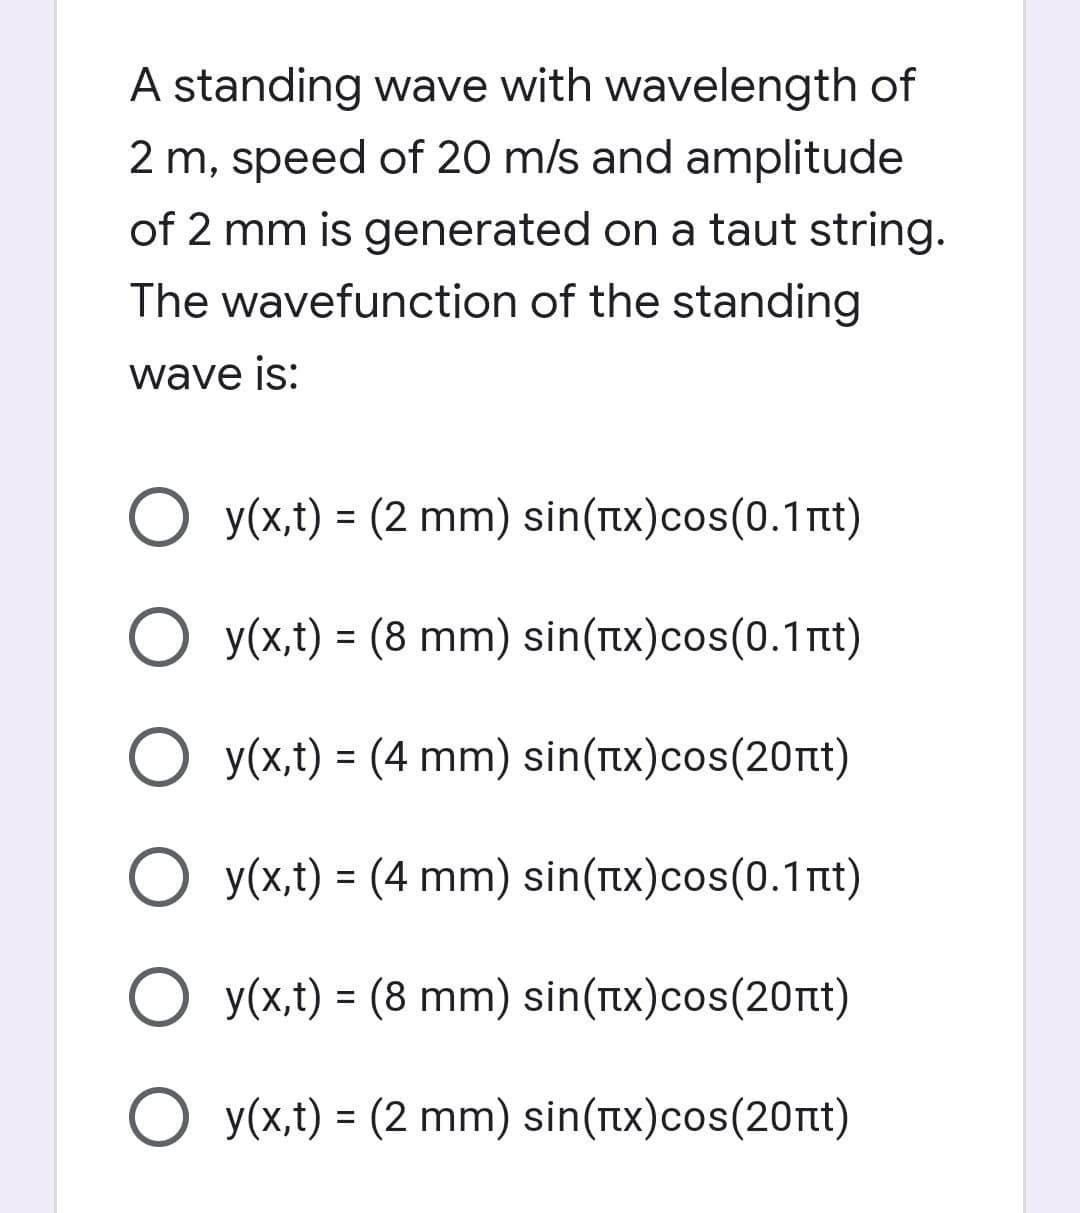 A standing wave with wavelength of
2 m, speed of 20 m/s and amplitude
of 2 mm is generated on a taut string.
The wavefunction of the standing
wave is:
O y(x,t) = (2 mm) sin(Tx)cos(0.1nt)
%3D
O y(x,t) = (8 mm) sin(Tx)cos(0.1nt)
%3D
O y(x,t) = (4 mm) sin(Tx)cos(20rt)
O y(x,t) = (4 mm) sin(Tx)cos(0.1nt)
%3D
O y(x,t) = (8 mm) sin(TIx)cos(20nt)
%3D
O y(x,t) = (2 mm) sin(Tx)cos(20nt)
%3D
